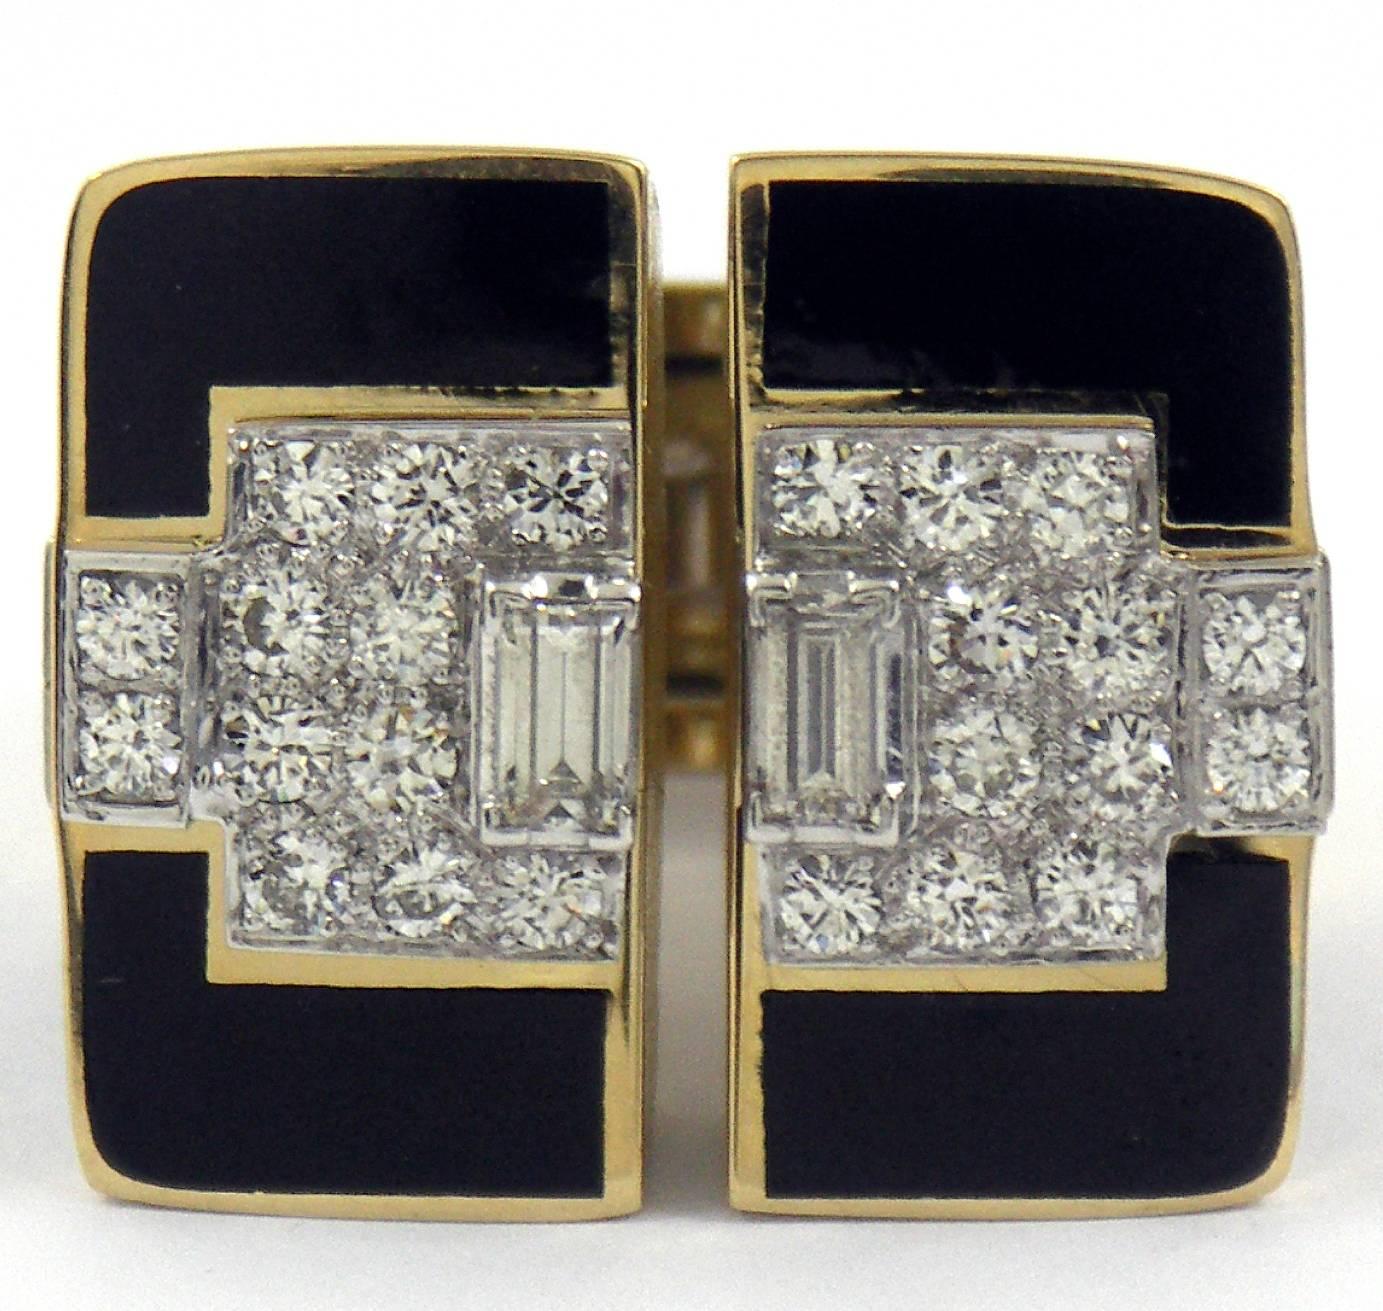 The strong, art deco platinum plates on top are set with two emerald cut and 20 round diamonds. There are 14 additional round diamonds set into platinum plates flanking the top and sides, for an approximate total of 2.25CT of overall G Color VS1